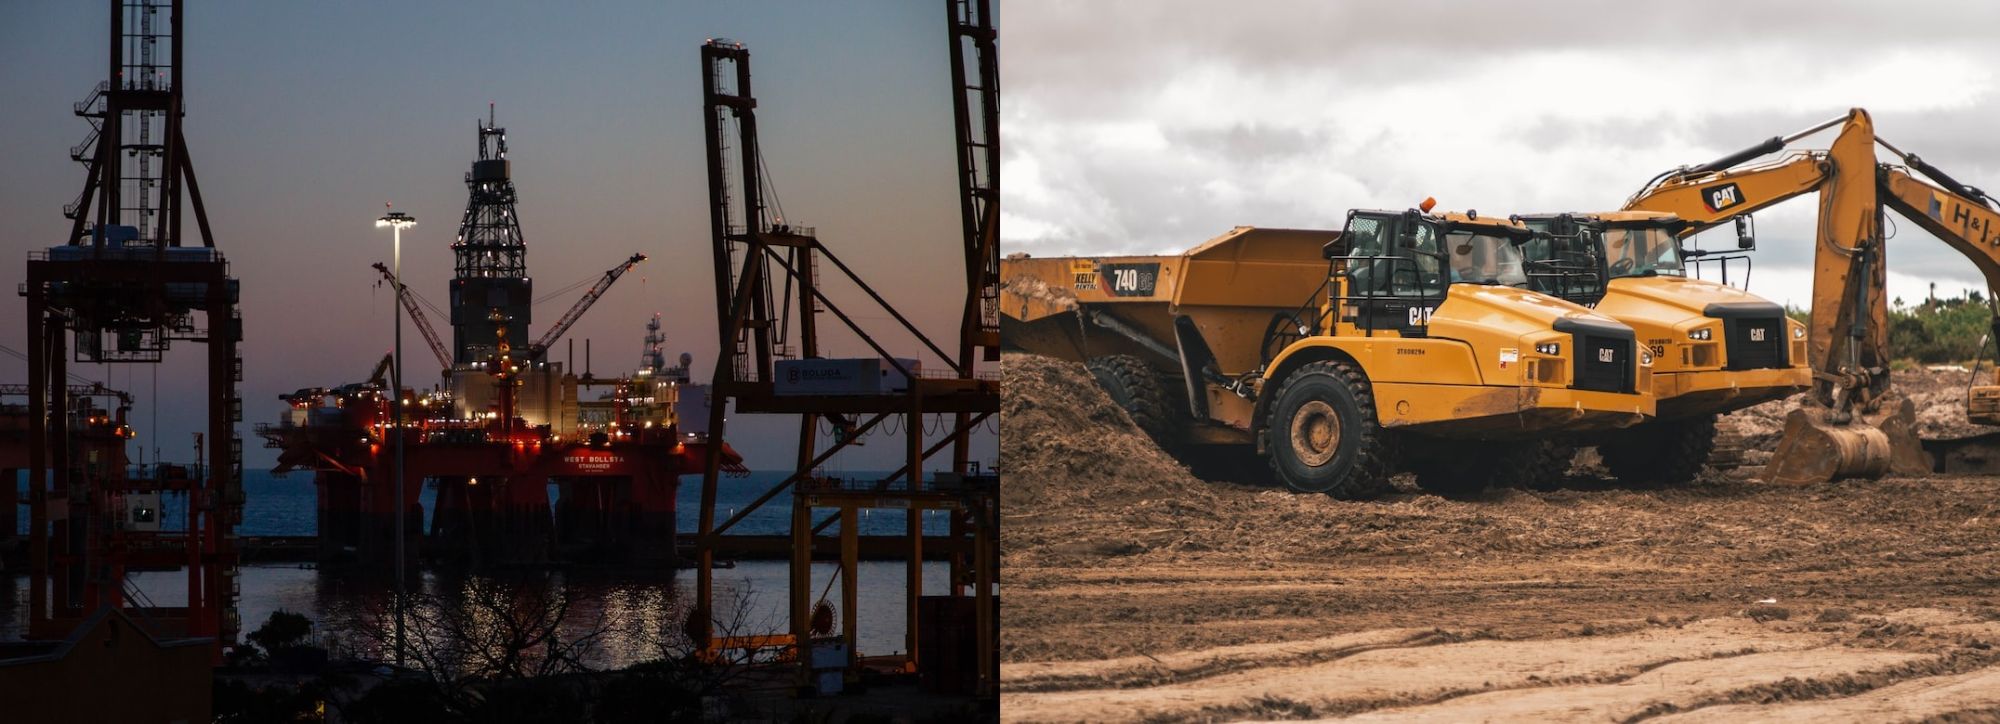 CaterpillarÂ® Engine Repair and Remanufacturing Services For Oil and Gas and Mining Companies Throughout Australia and Worldwide